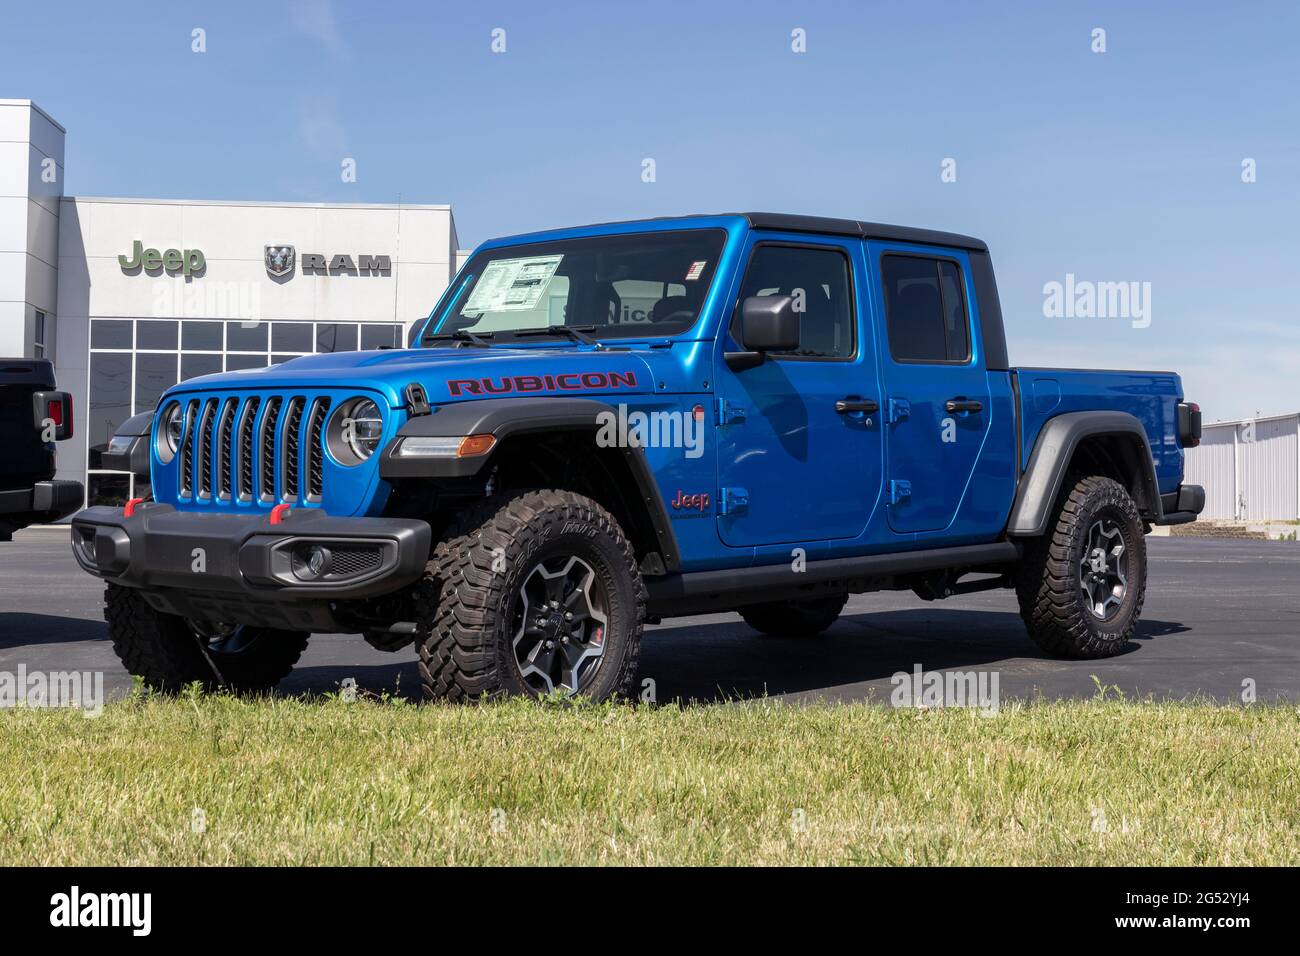 Warsaw Circa June 21 Jeep Gladiator Display At A Jeep Ram Dealer The Stellantis Subsidiaries Of Fca Are Chrysler Dodge Jeep And Ram Stock Photo Alamy